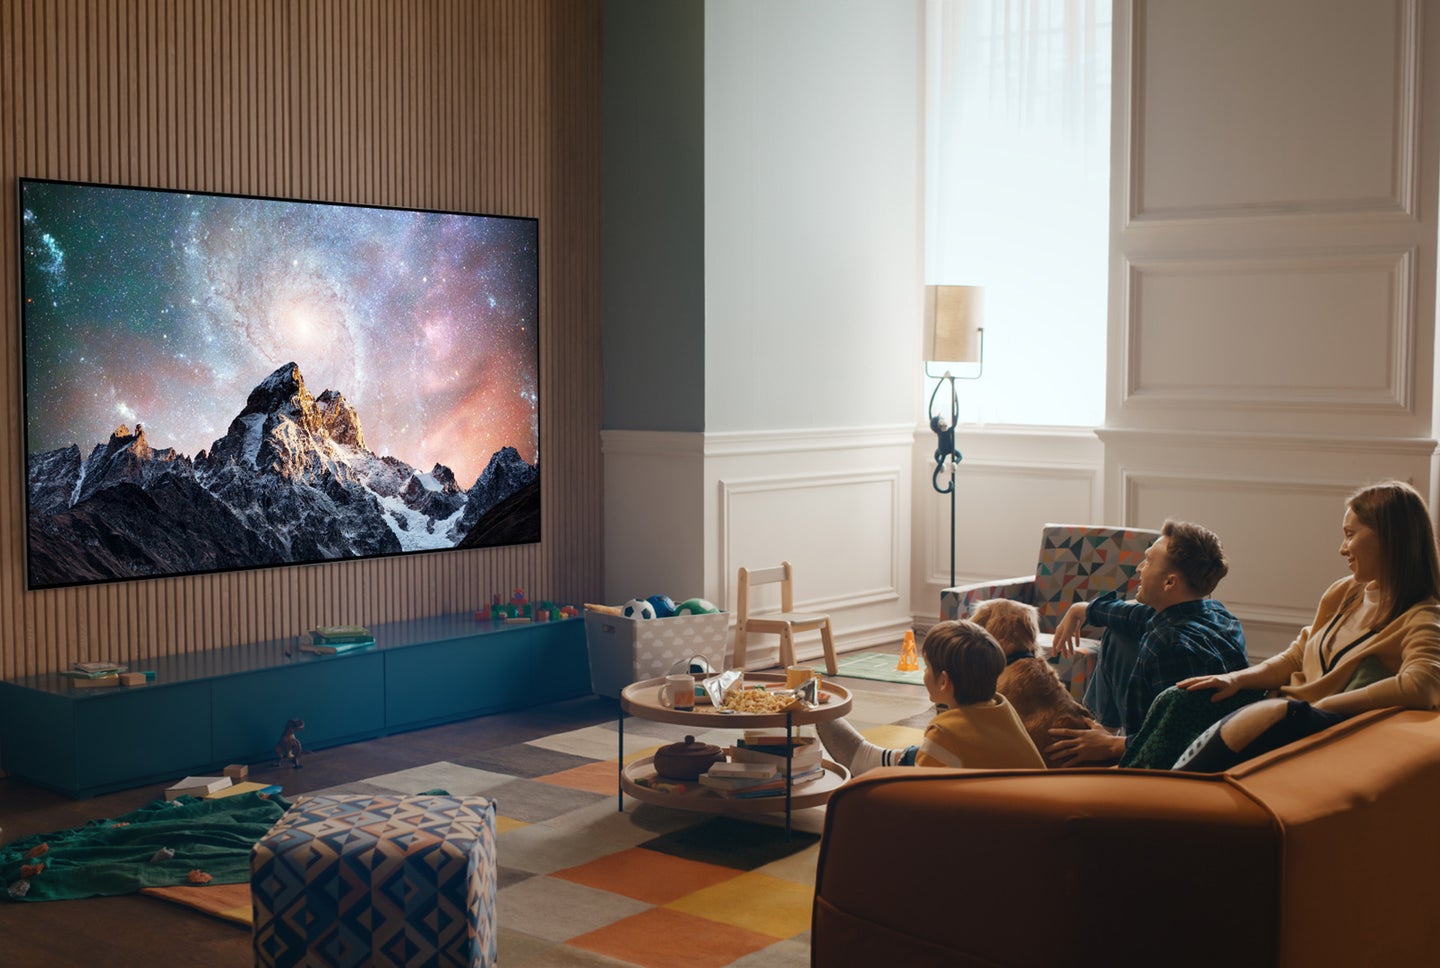 Gather the family around the new LG C2 OLED and we'll explain TV resolutions to you.